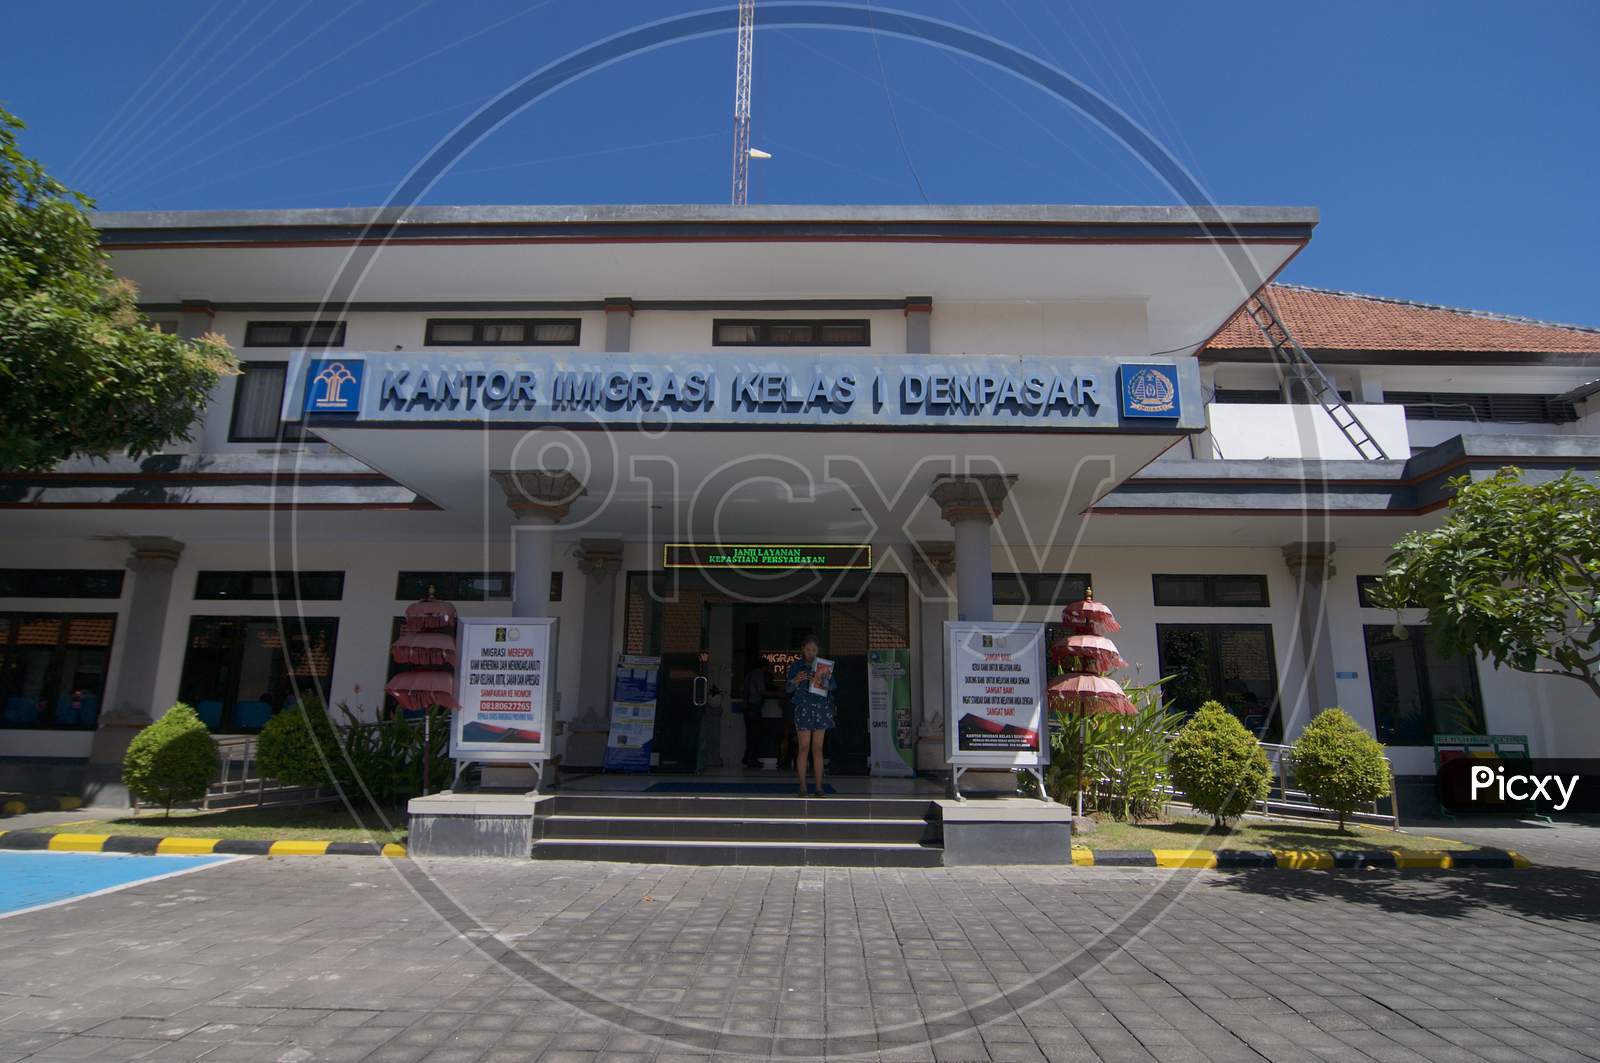 Building Exterior Of Immigration Office Of Denpasar In Bali, Indonesia